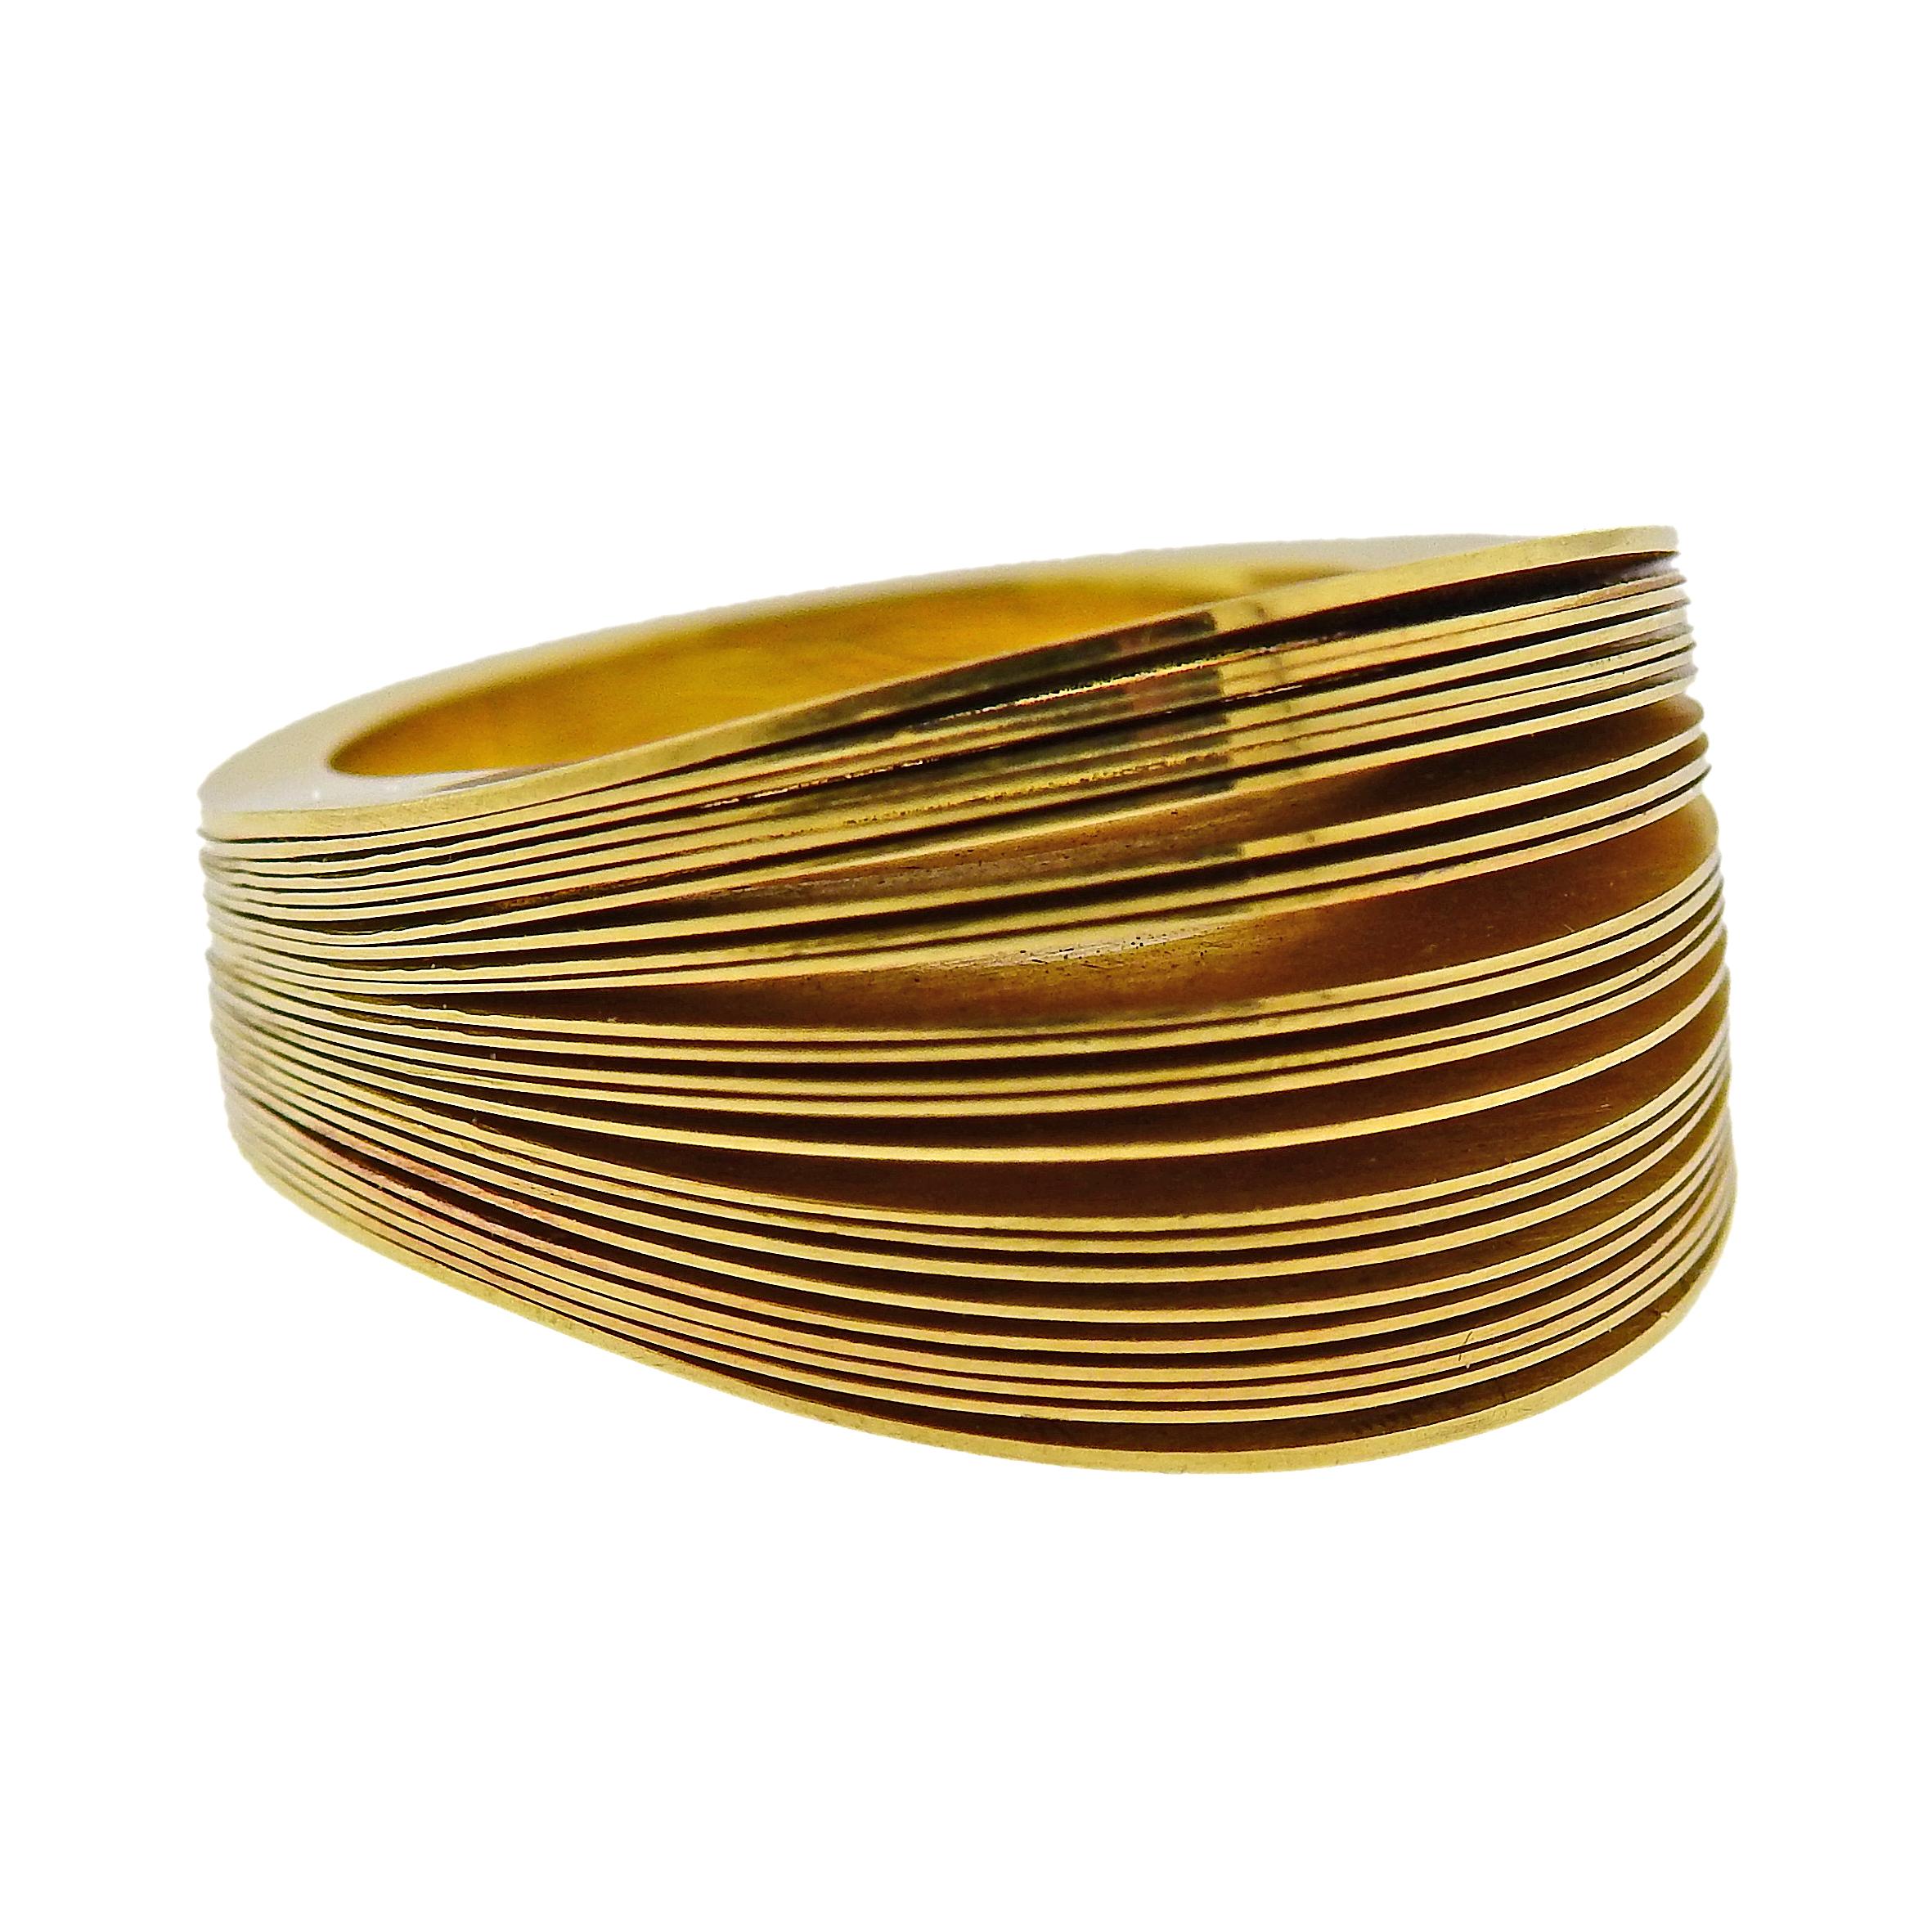 18k yellow gold ring by Antonio Bernardo, featuring layered 18k gold ring. Ring size - 5.75, ring top is 15mm wide. Marked: 750, Maker's mark. Weight: 21.5 grams.